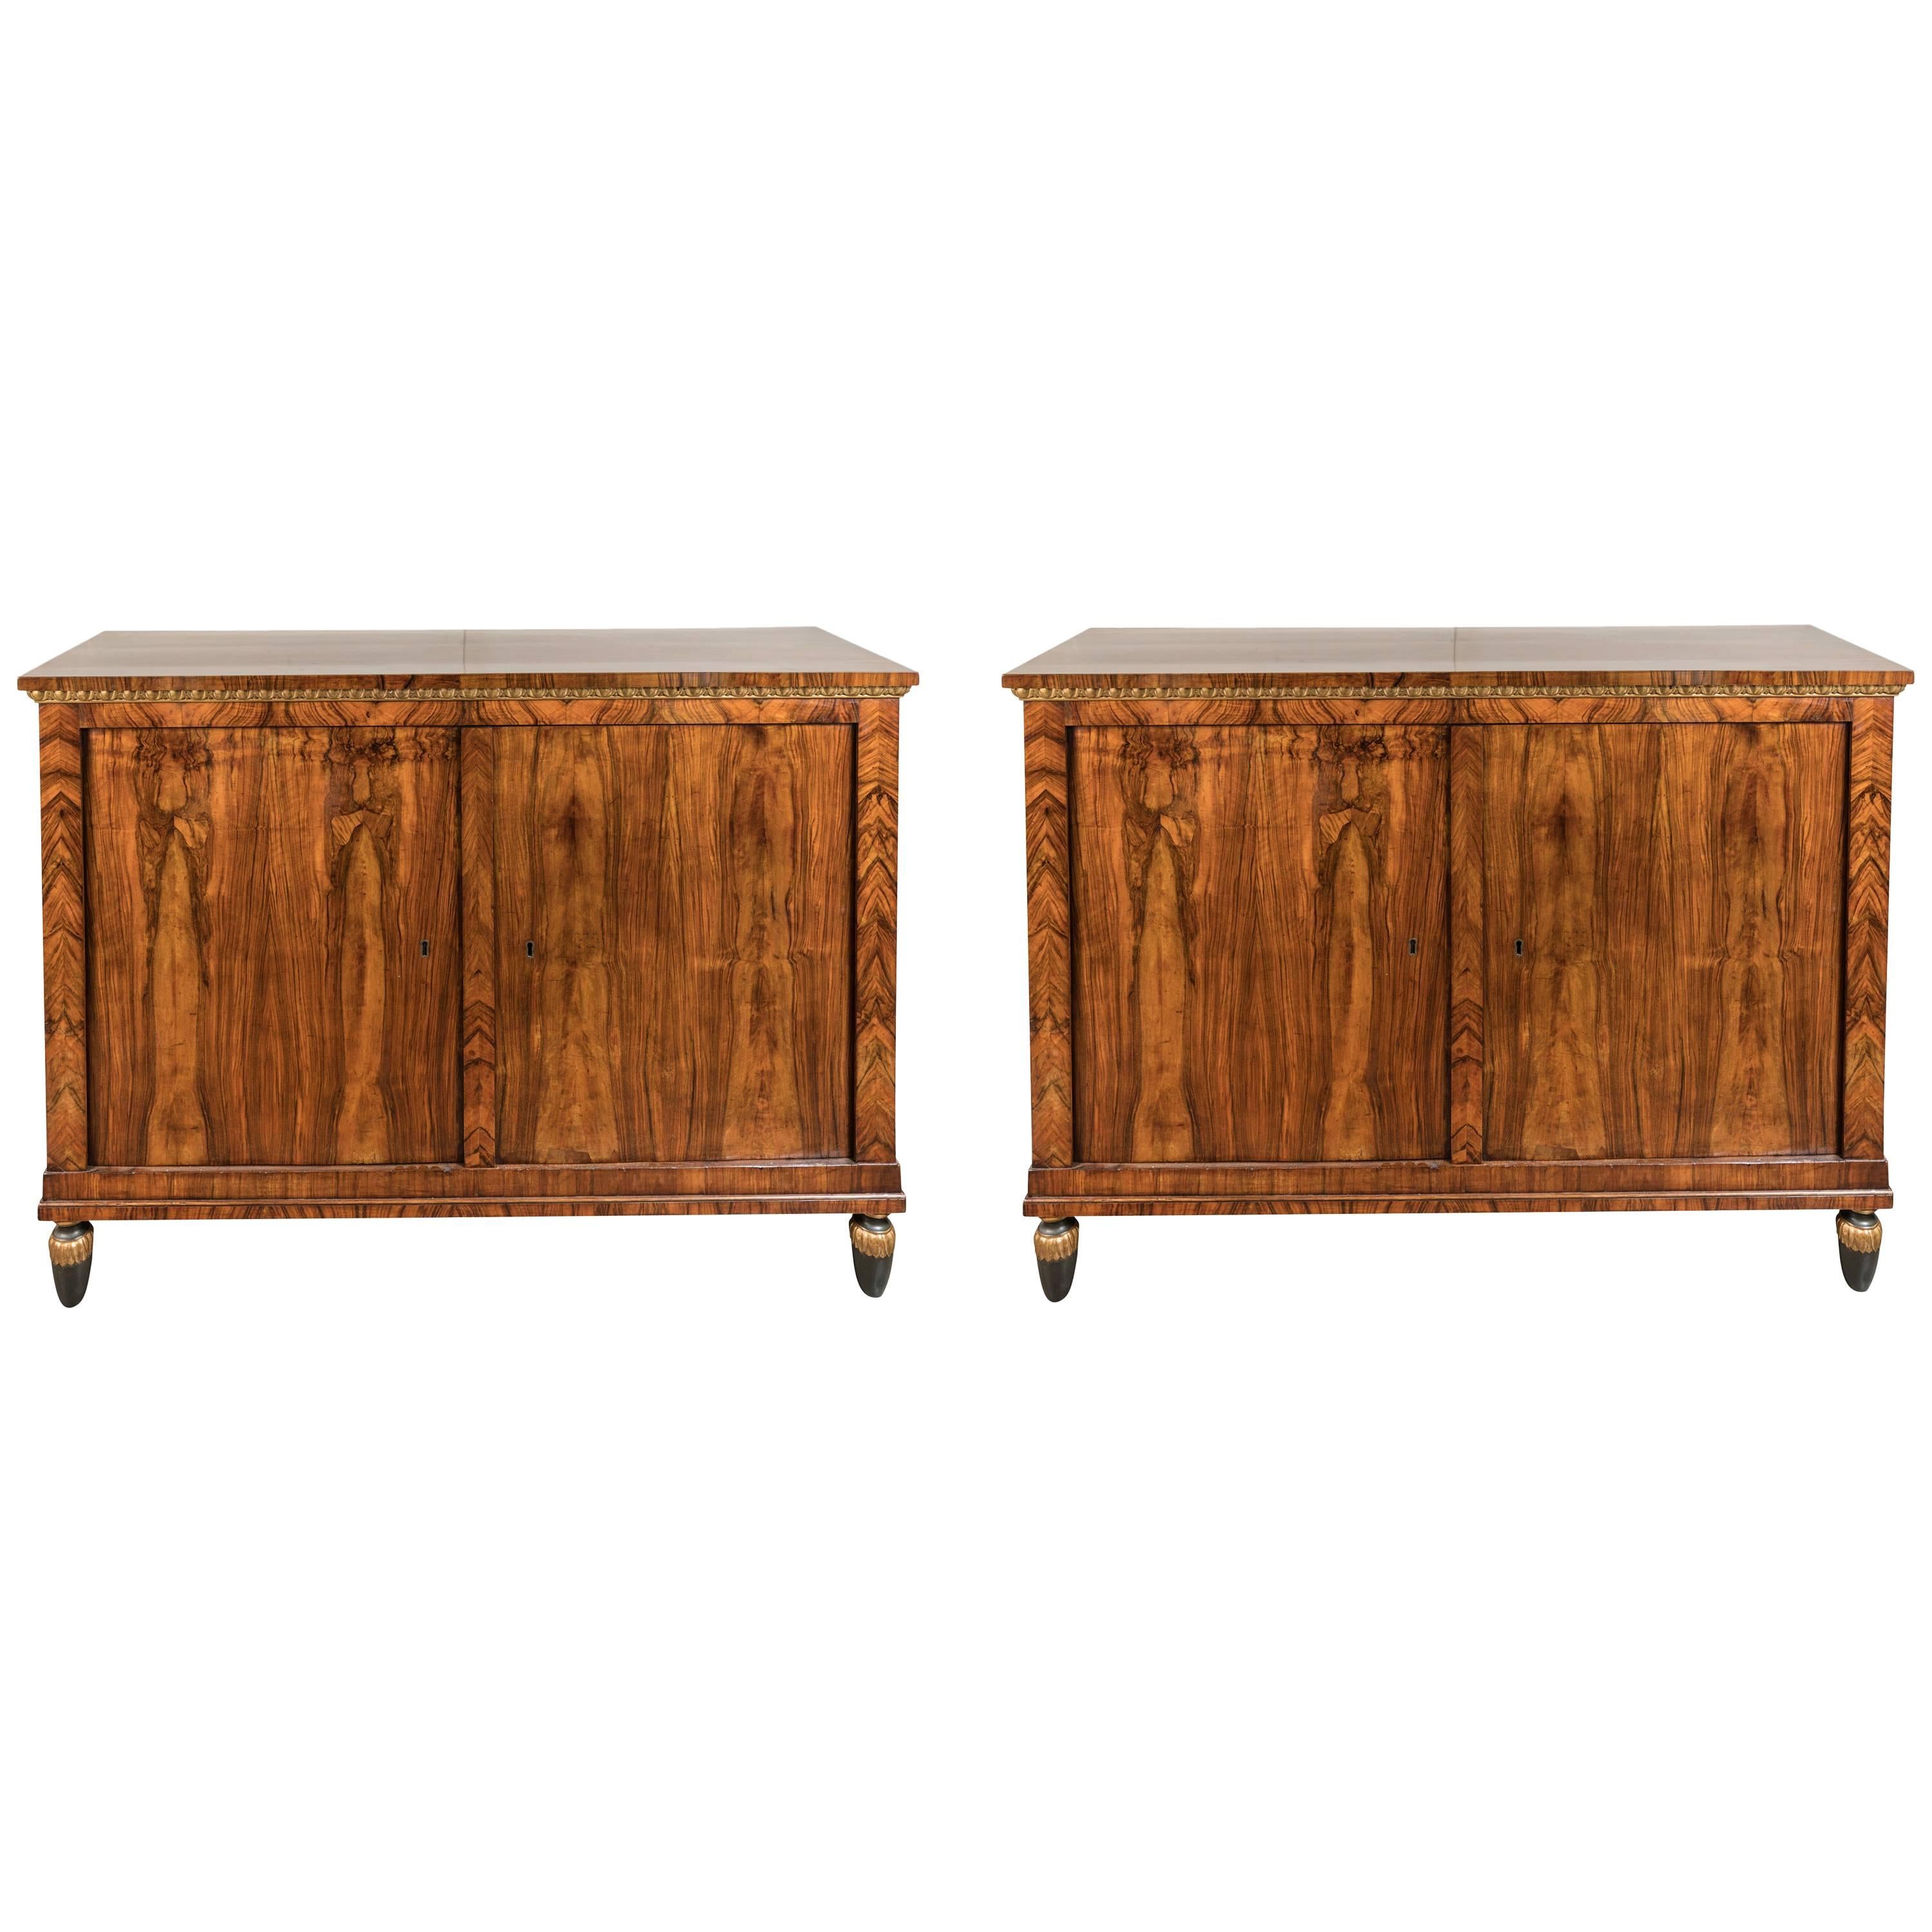 Pair of Fine, Tuscan, Burl Wood Cabinets